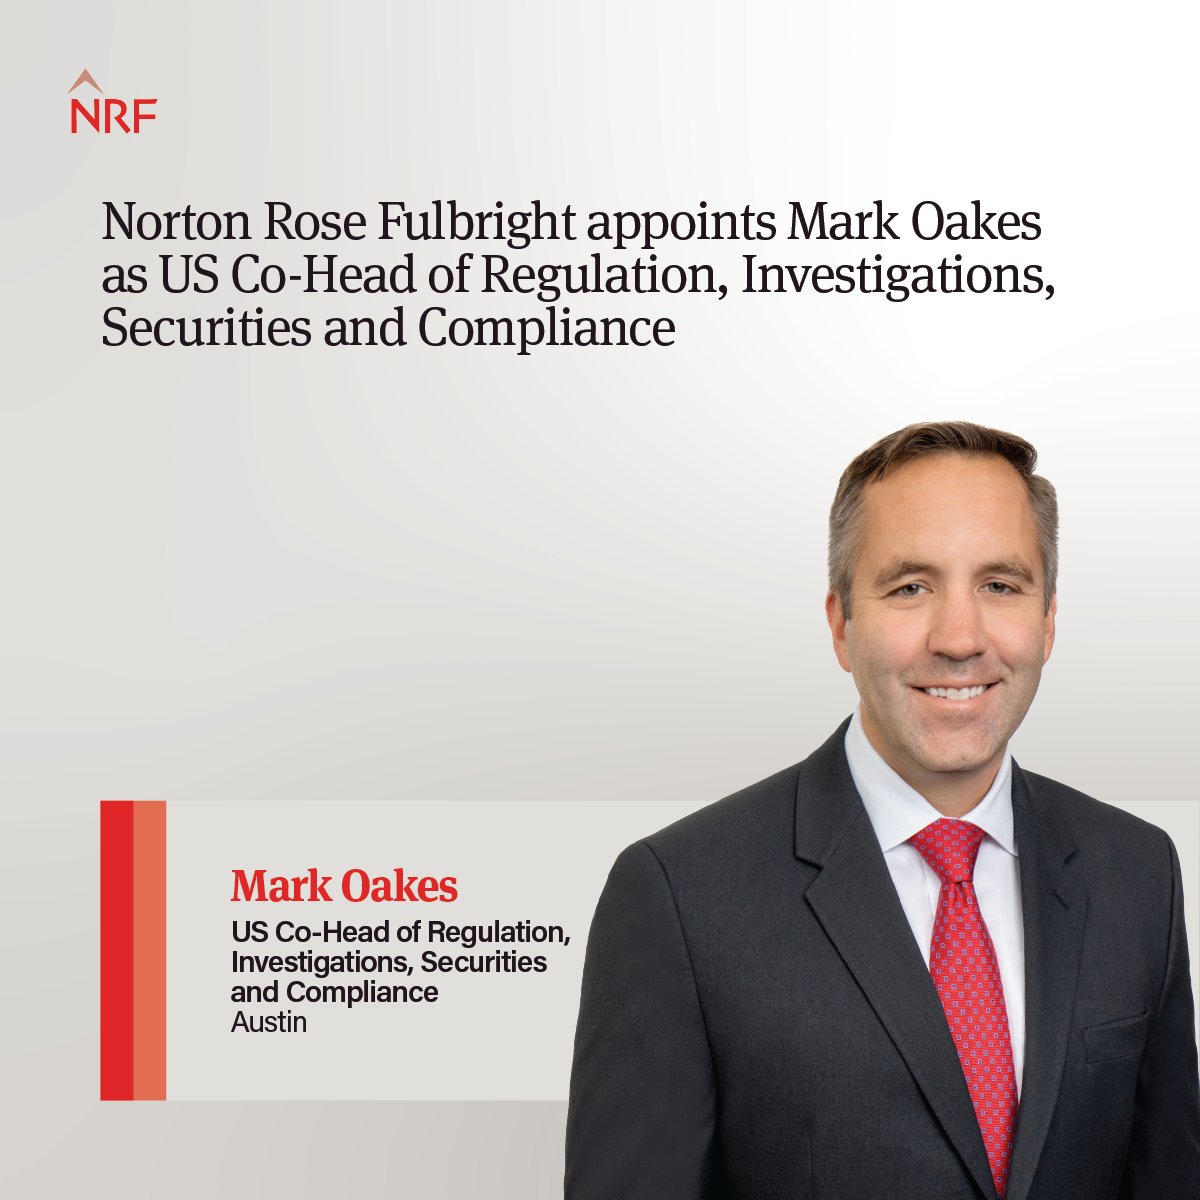 We’re pleased to announce that Austin partner Mark Oakes has been appointed as our firm’s US Co-Head of Regulation, Investigations, Securities and Compliance. ow.ly/AWml50RHrCX